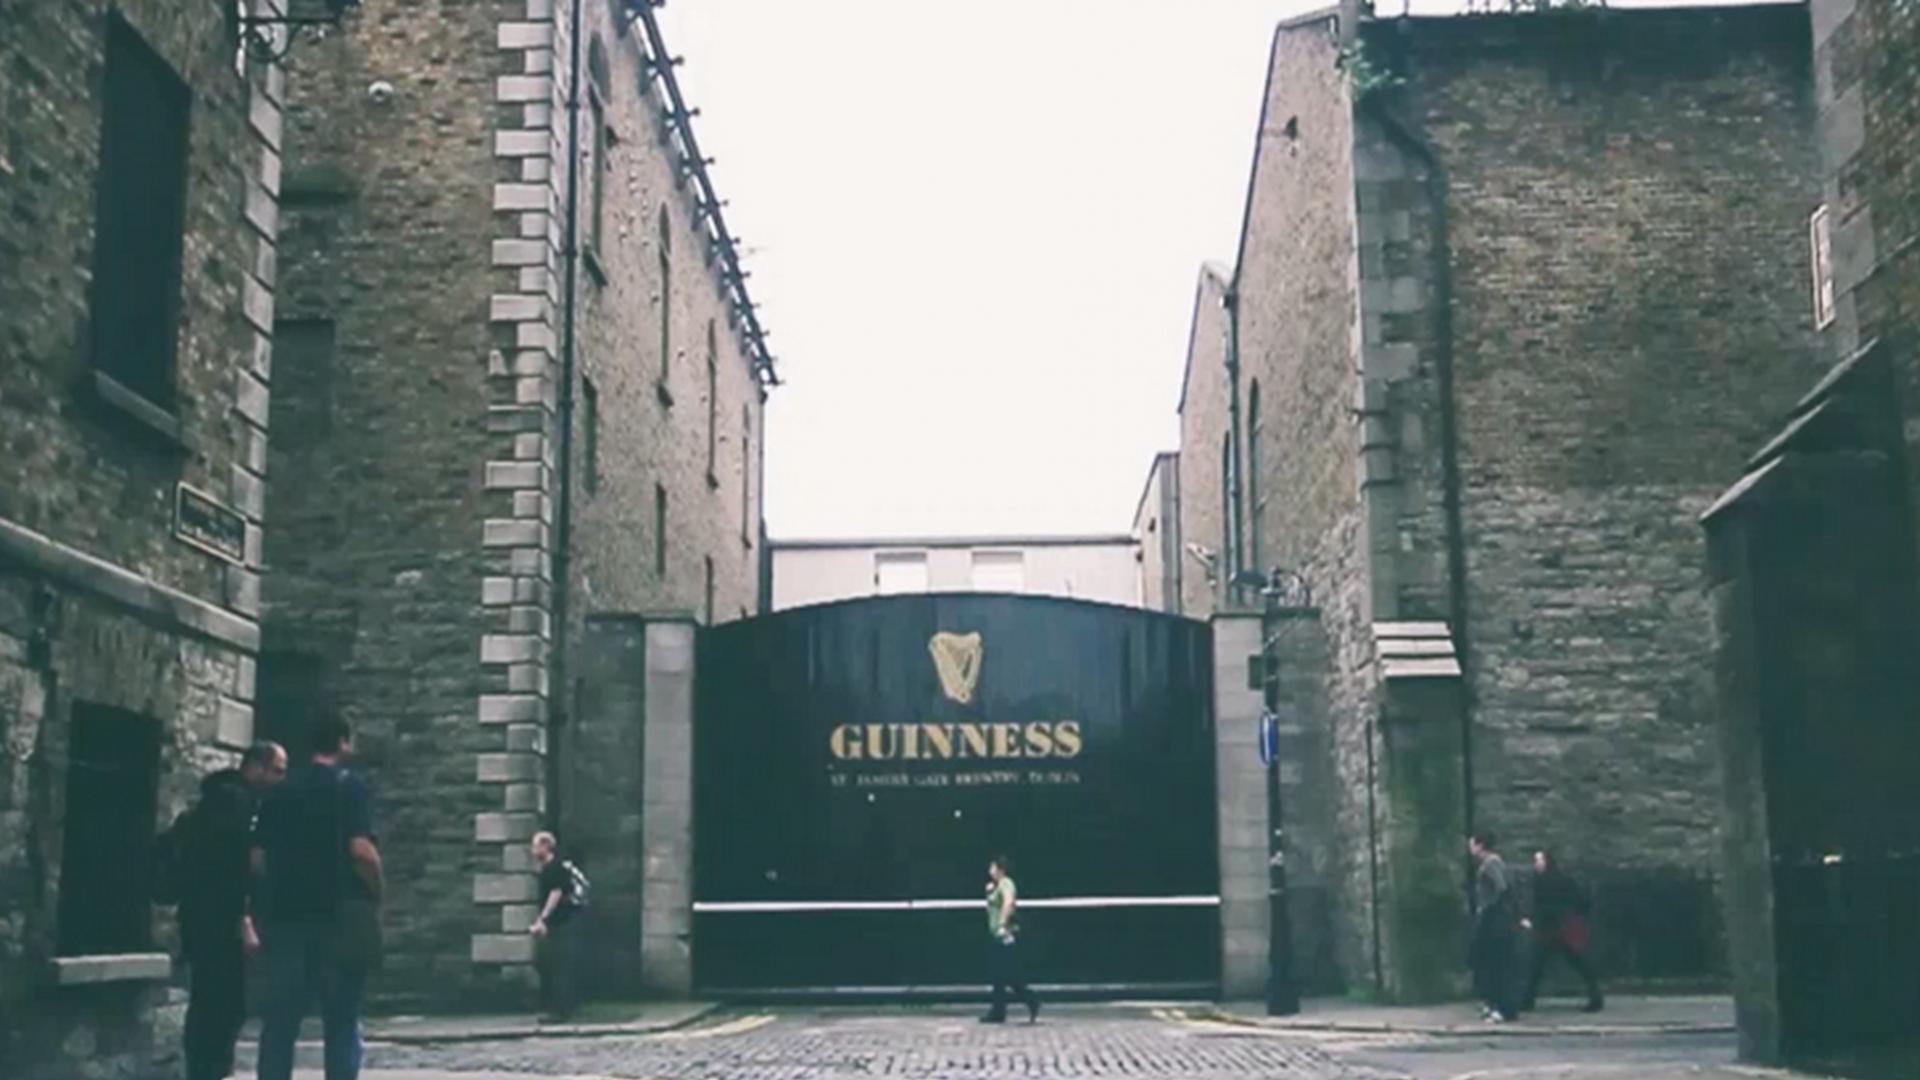 Skip the Line Guinness and Jameson Irish Whiskey Experience Tour in Dublin